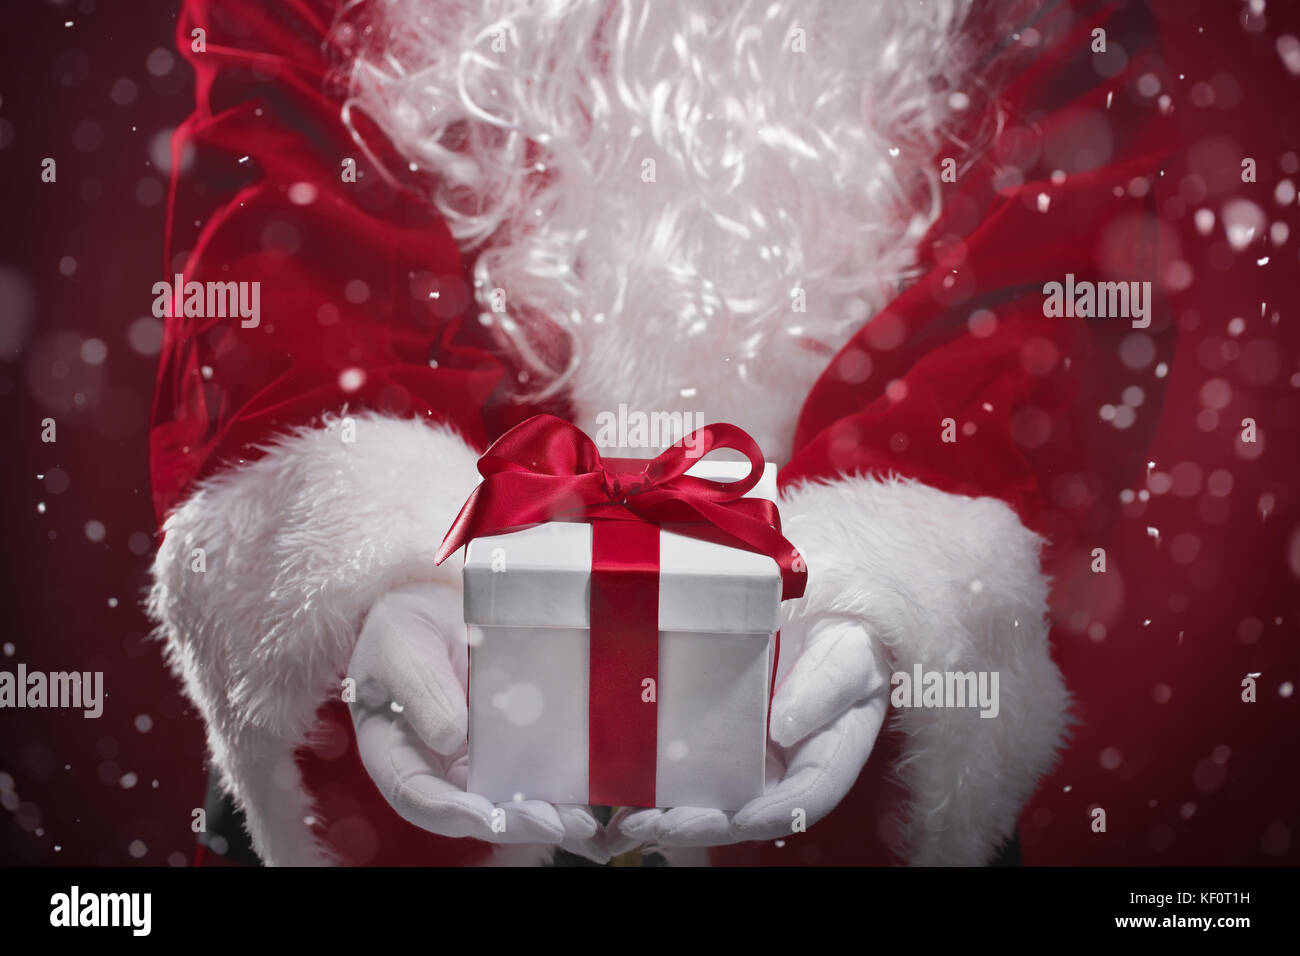 Santa Claus holding gift boxes in snow Stock Photo